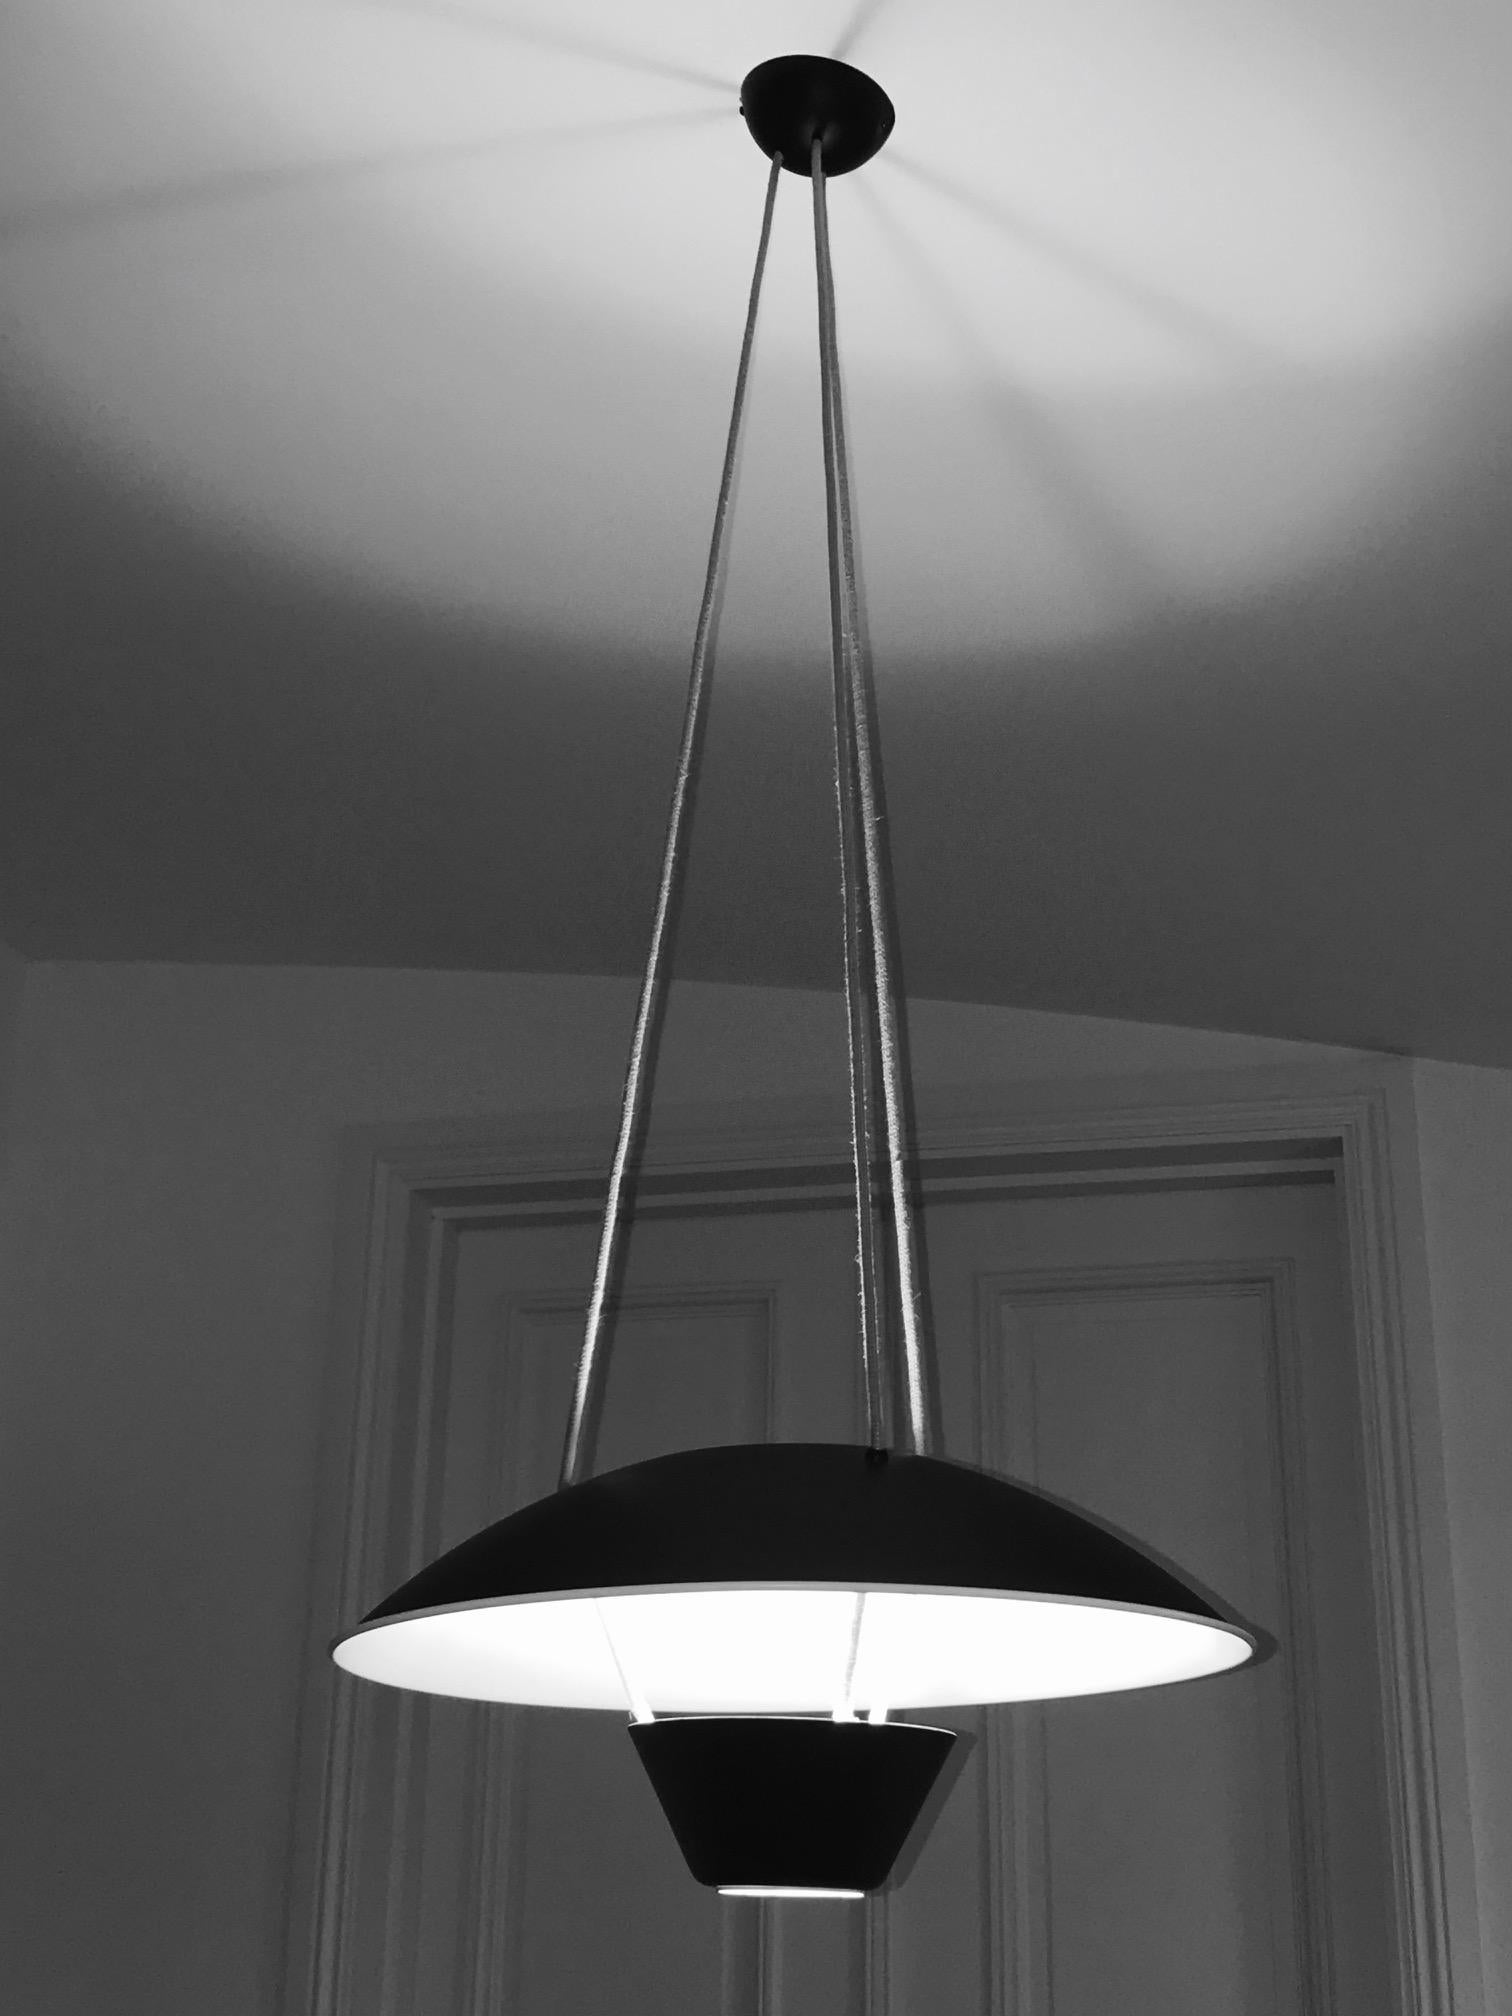 Designed is the shape of a hot air balloon, this ceiling light represents part of the lighting revolution in the early 1950s.
It is one of the few lamps in the world to offer all three lighting modes in a single source: focused light to bring a